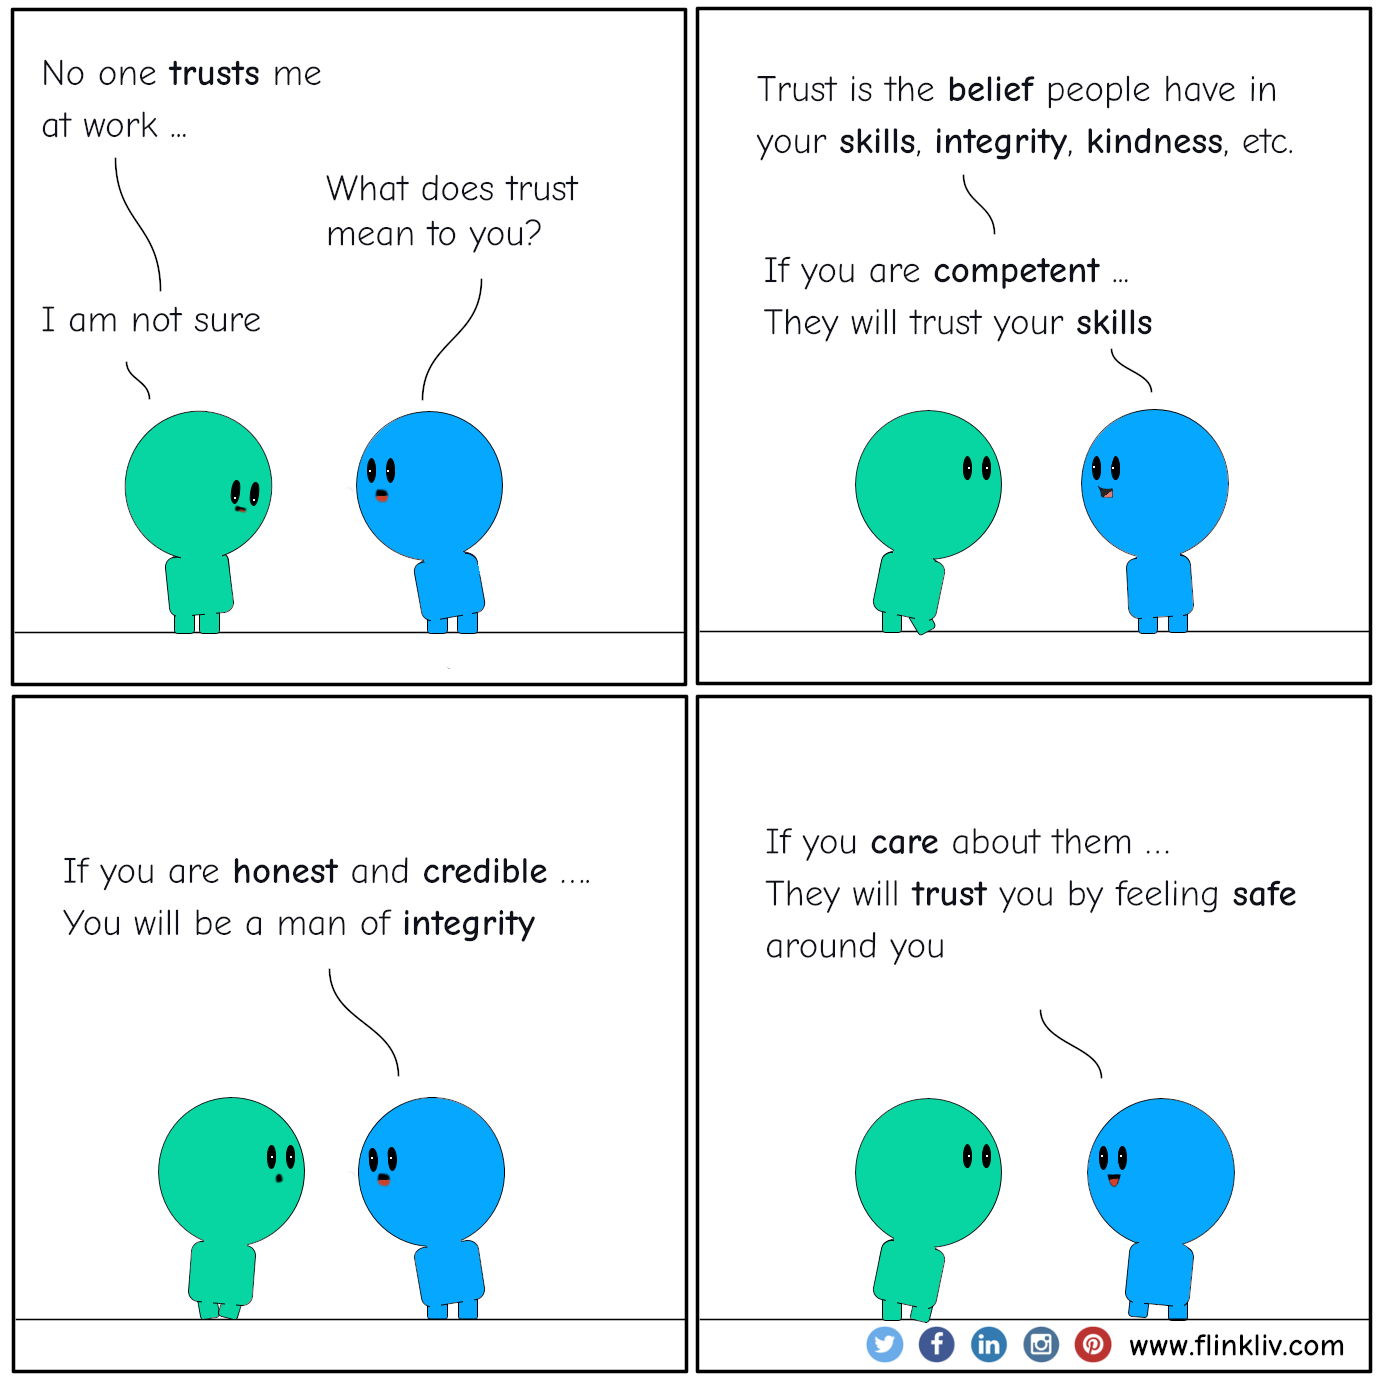 Conversation between A and B about trust.
              A: No one trusts me at work
B: What does trust mean to you?
A: I am not sure

B: Trust is the belief people have in your skills, integrity, kindness, etc.
B: If you are competent; they will trust your skills

B: If you are honest and credible, you will be a man of integrity

B: If you care about them They will trust you by feeling safe around you

              